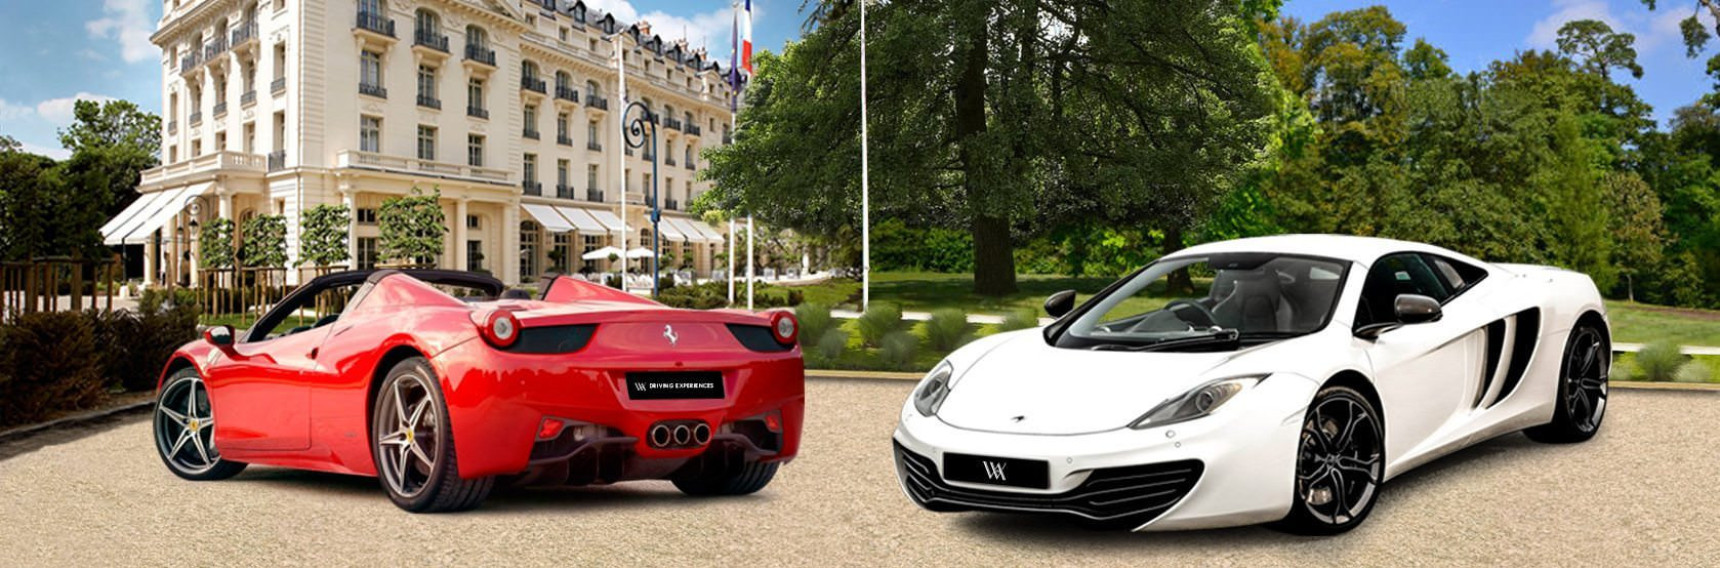 red and white supercars